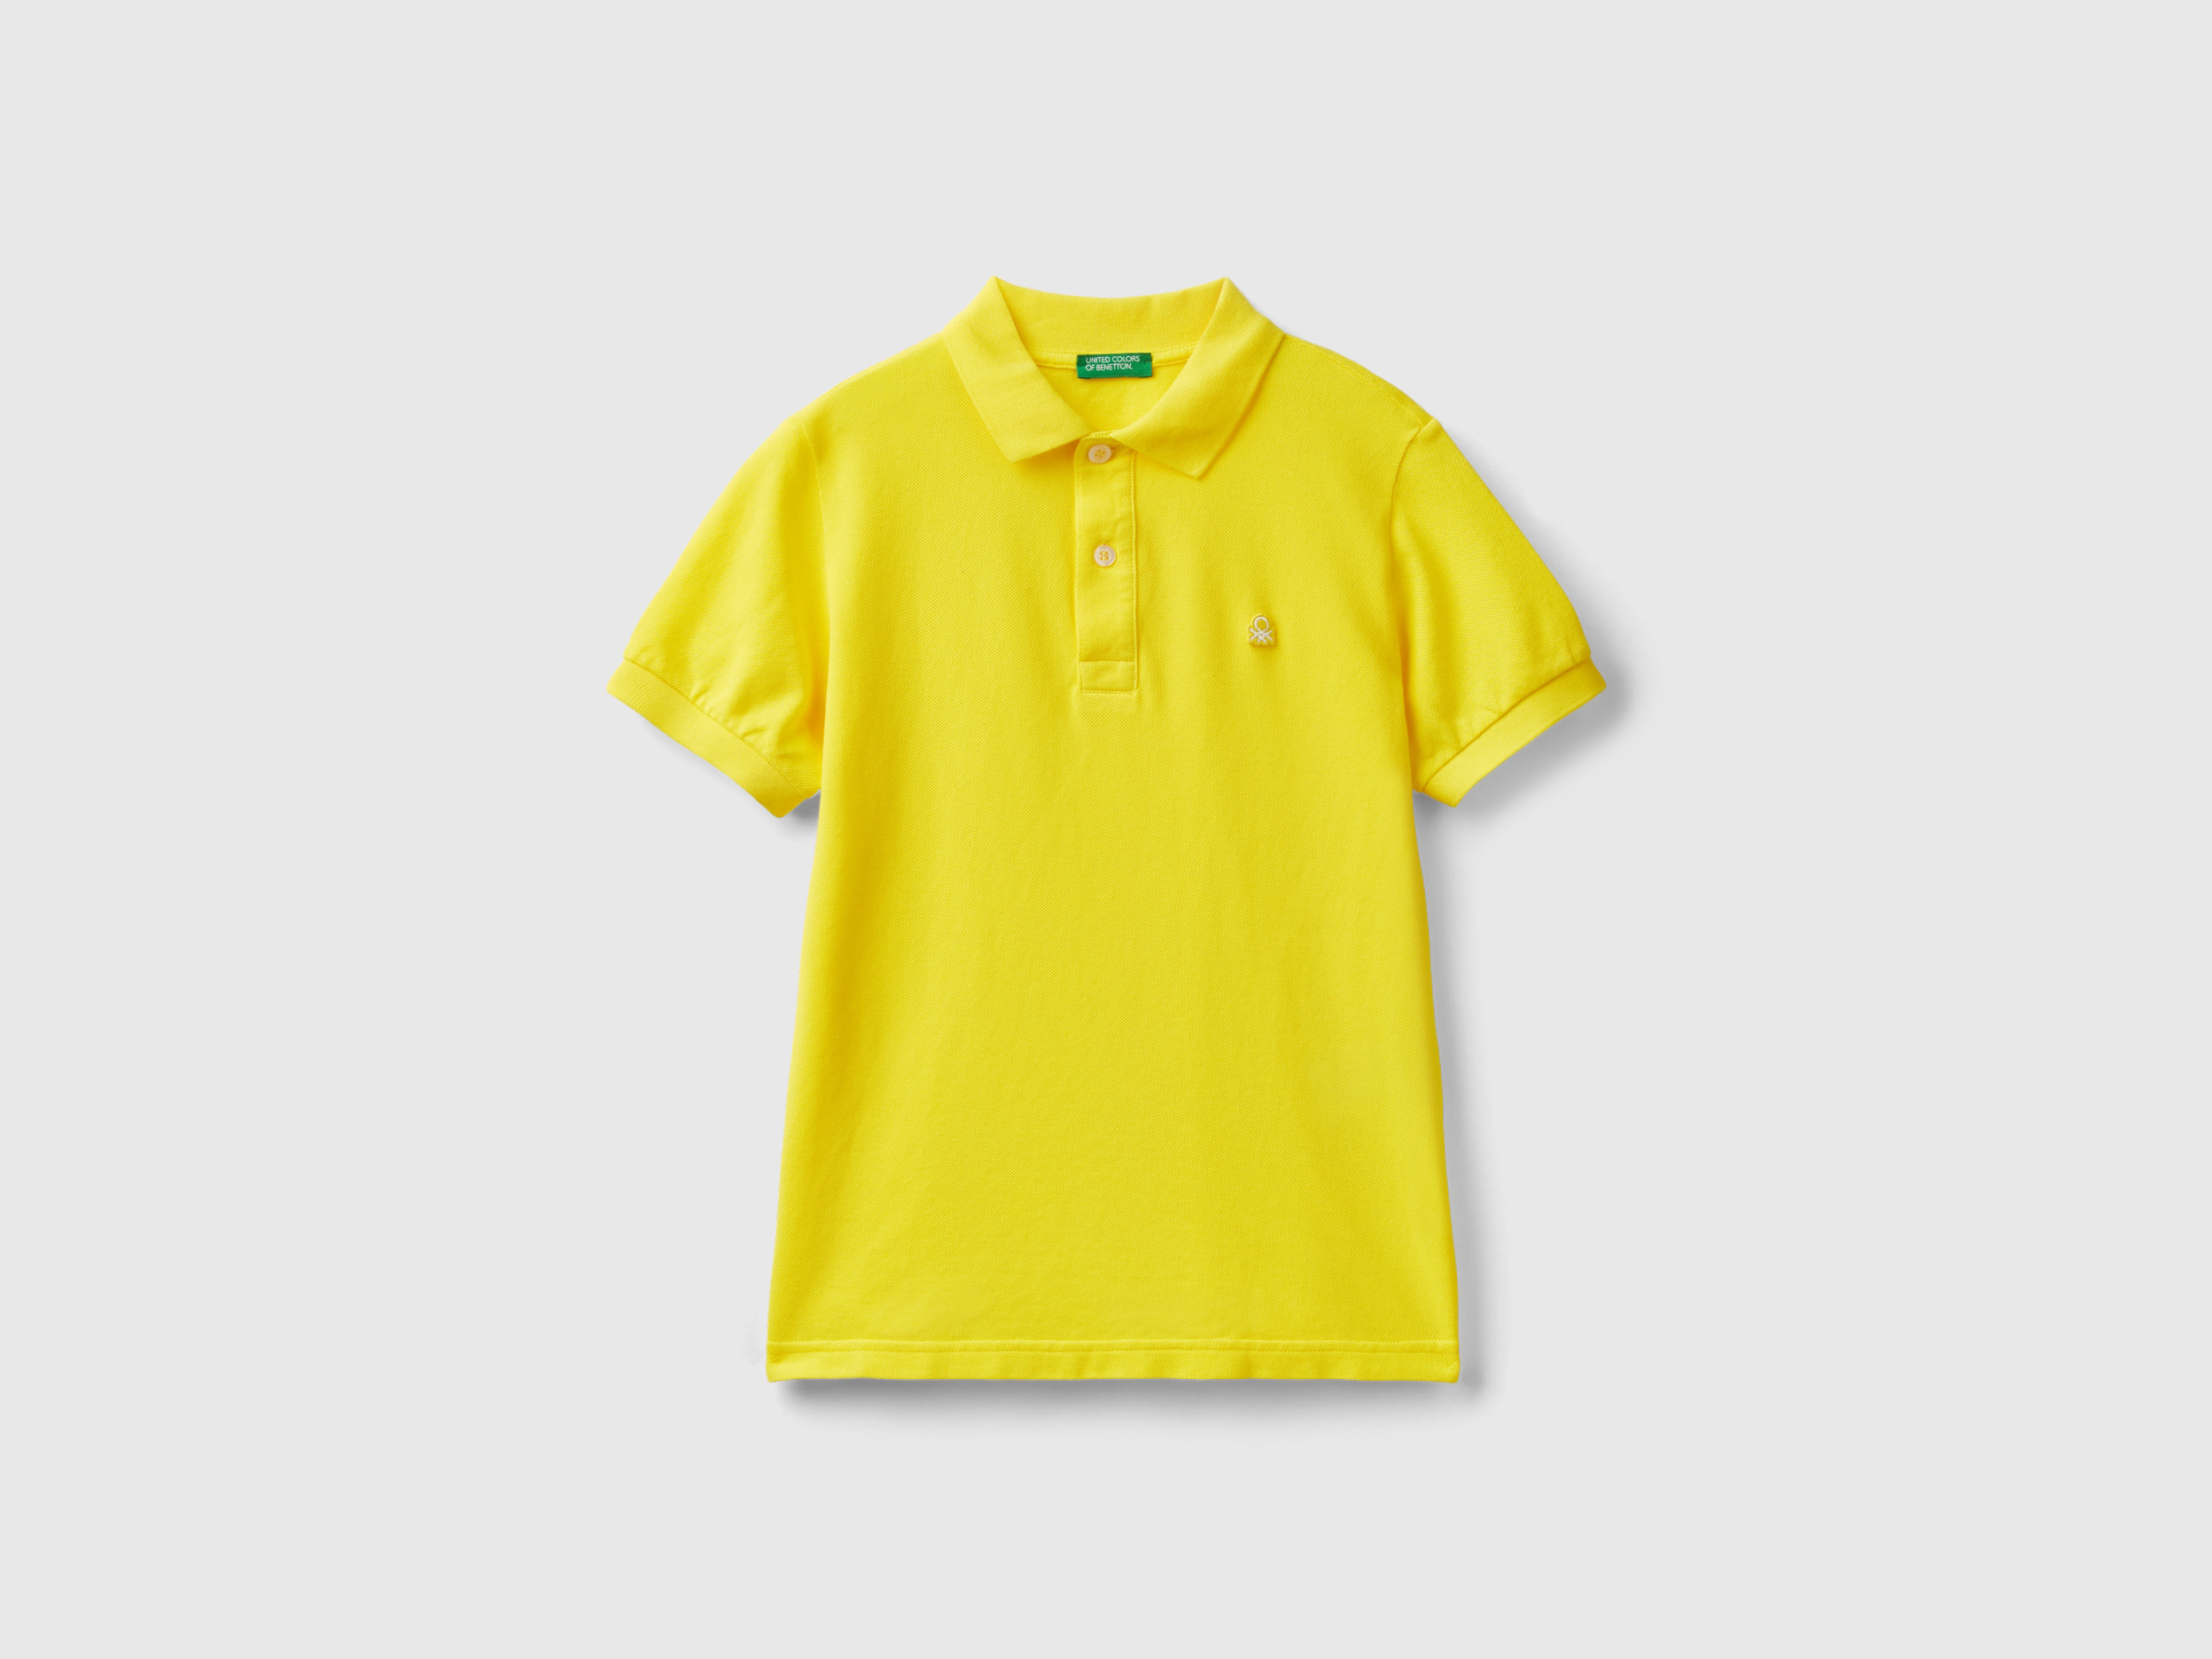 Image of Benetton, Slim Fit Polo In 100% Organic Cotton, size 3XL, Yellow, Kids